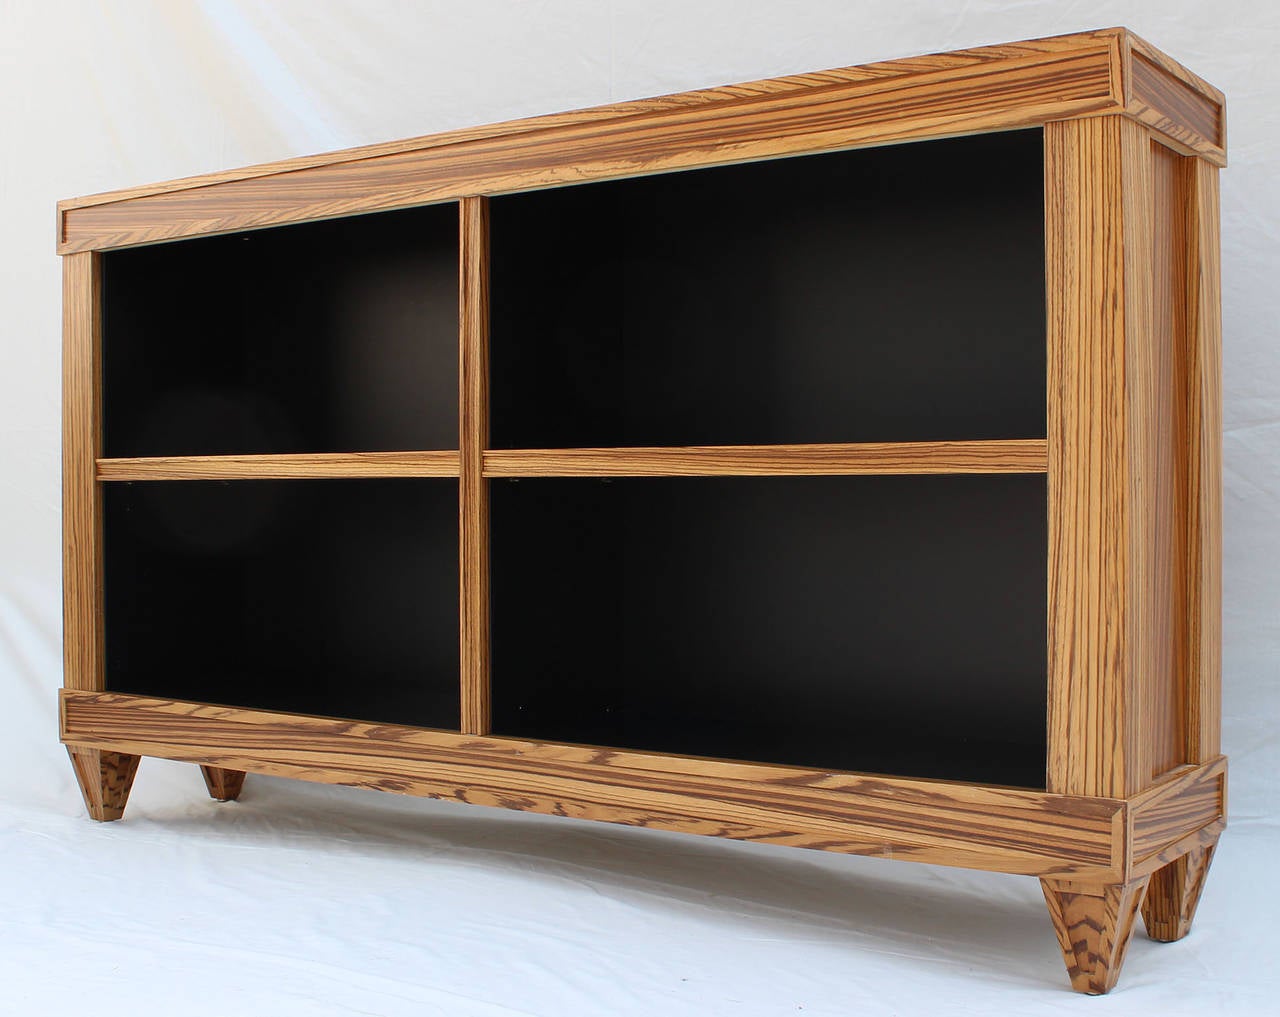 Magnificent post-modern, custom-made zebrawood bookshelves with black interior. Three available.

Complimentary shipping to Hamptons.